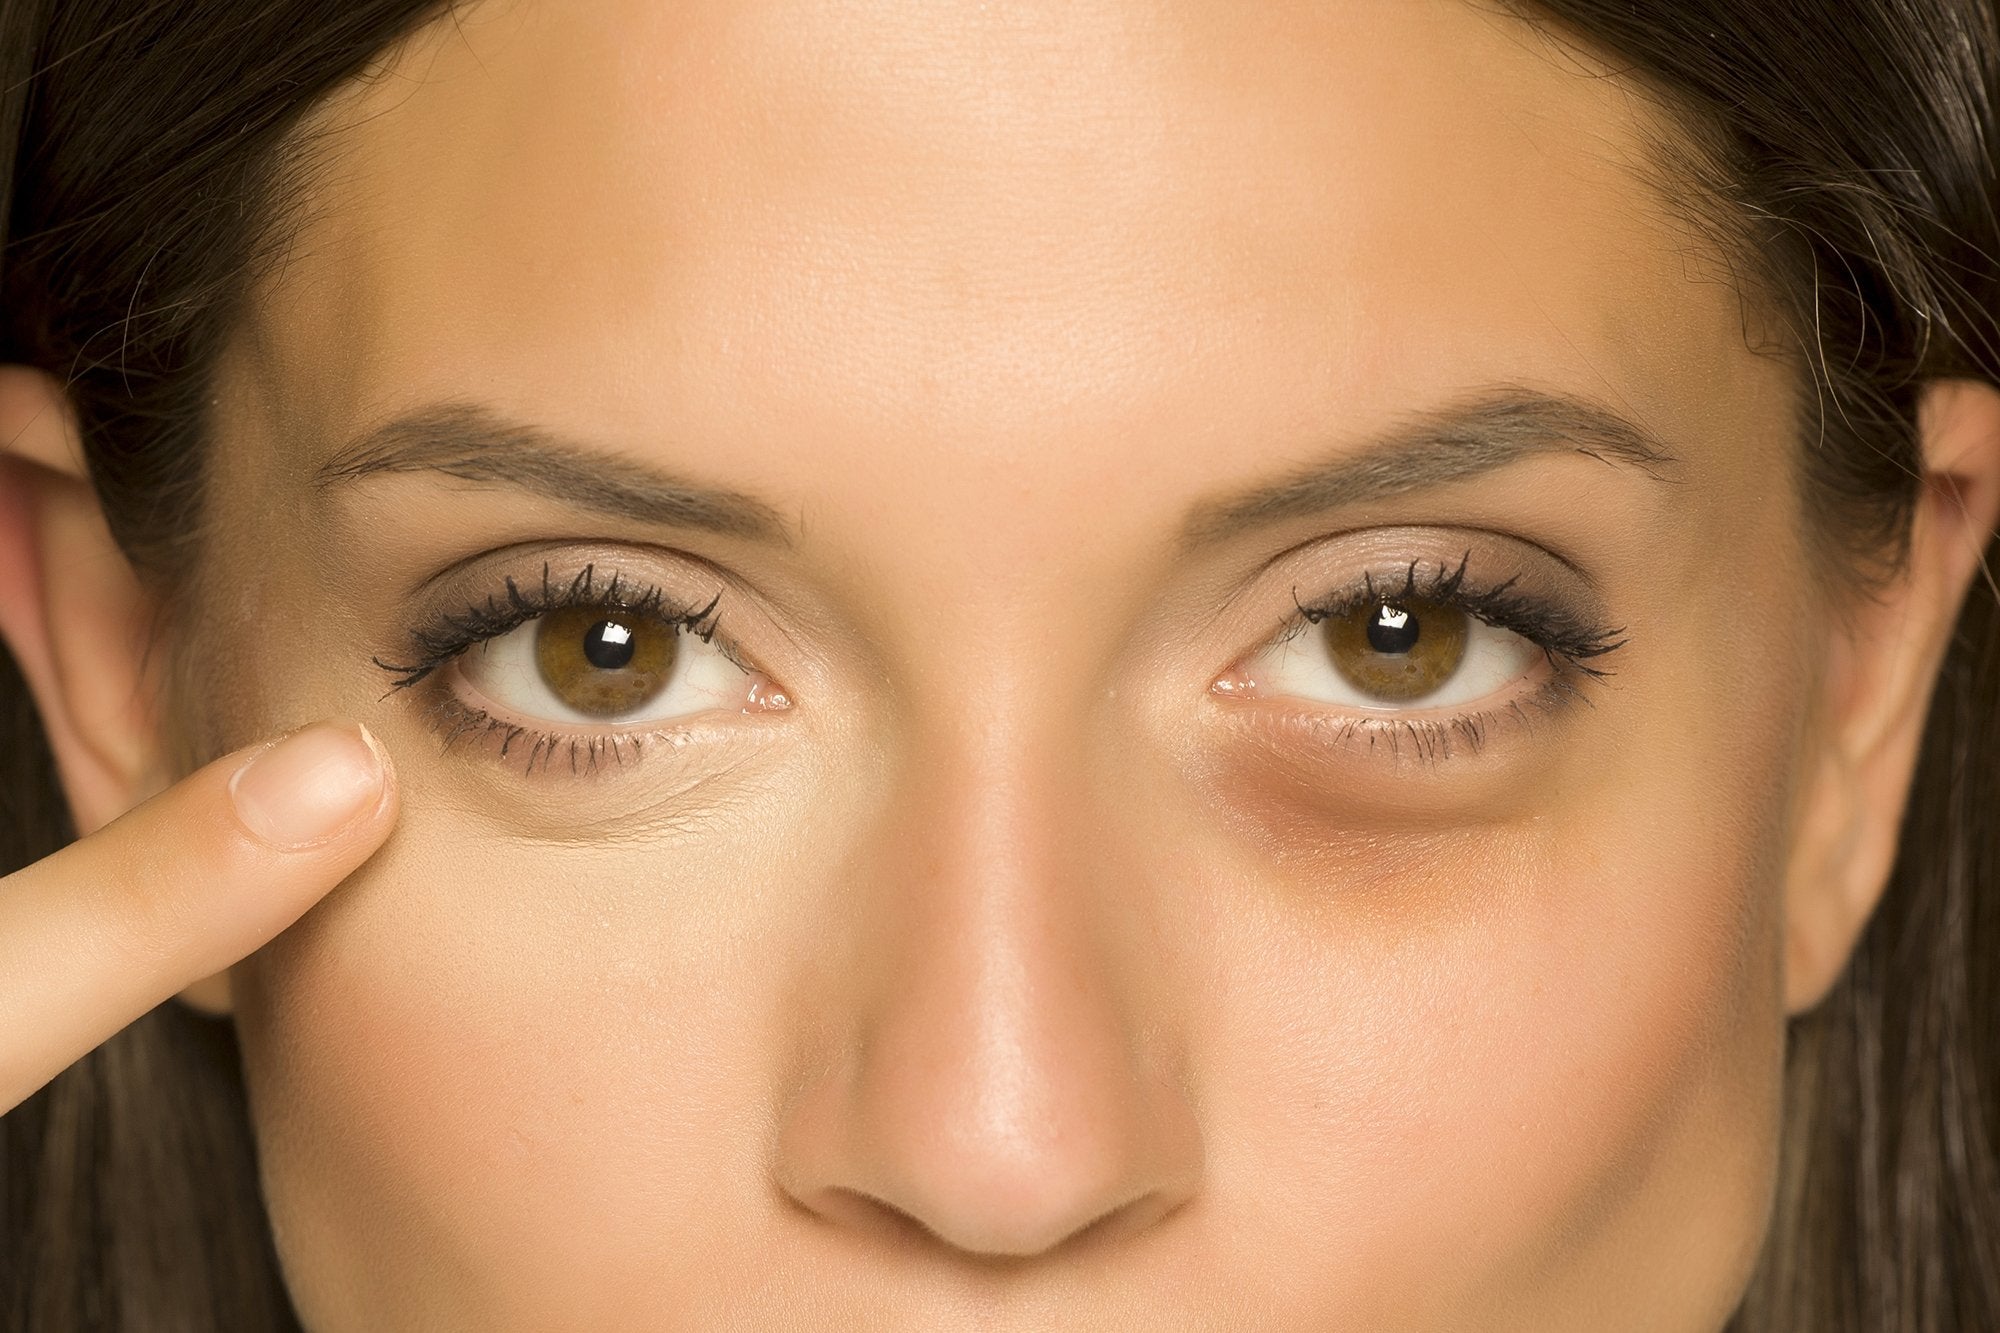 Why Do I Have Puffy Eyes & How Can I Get Rid of Them?